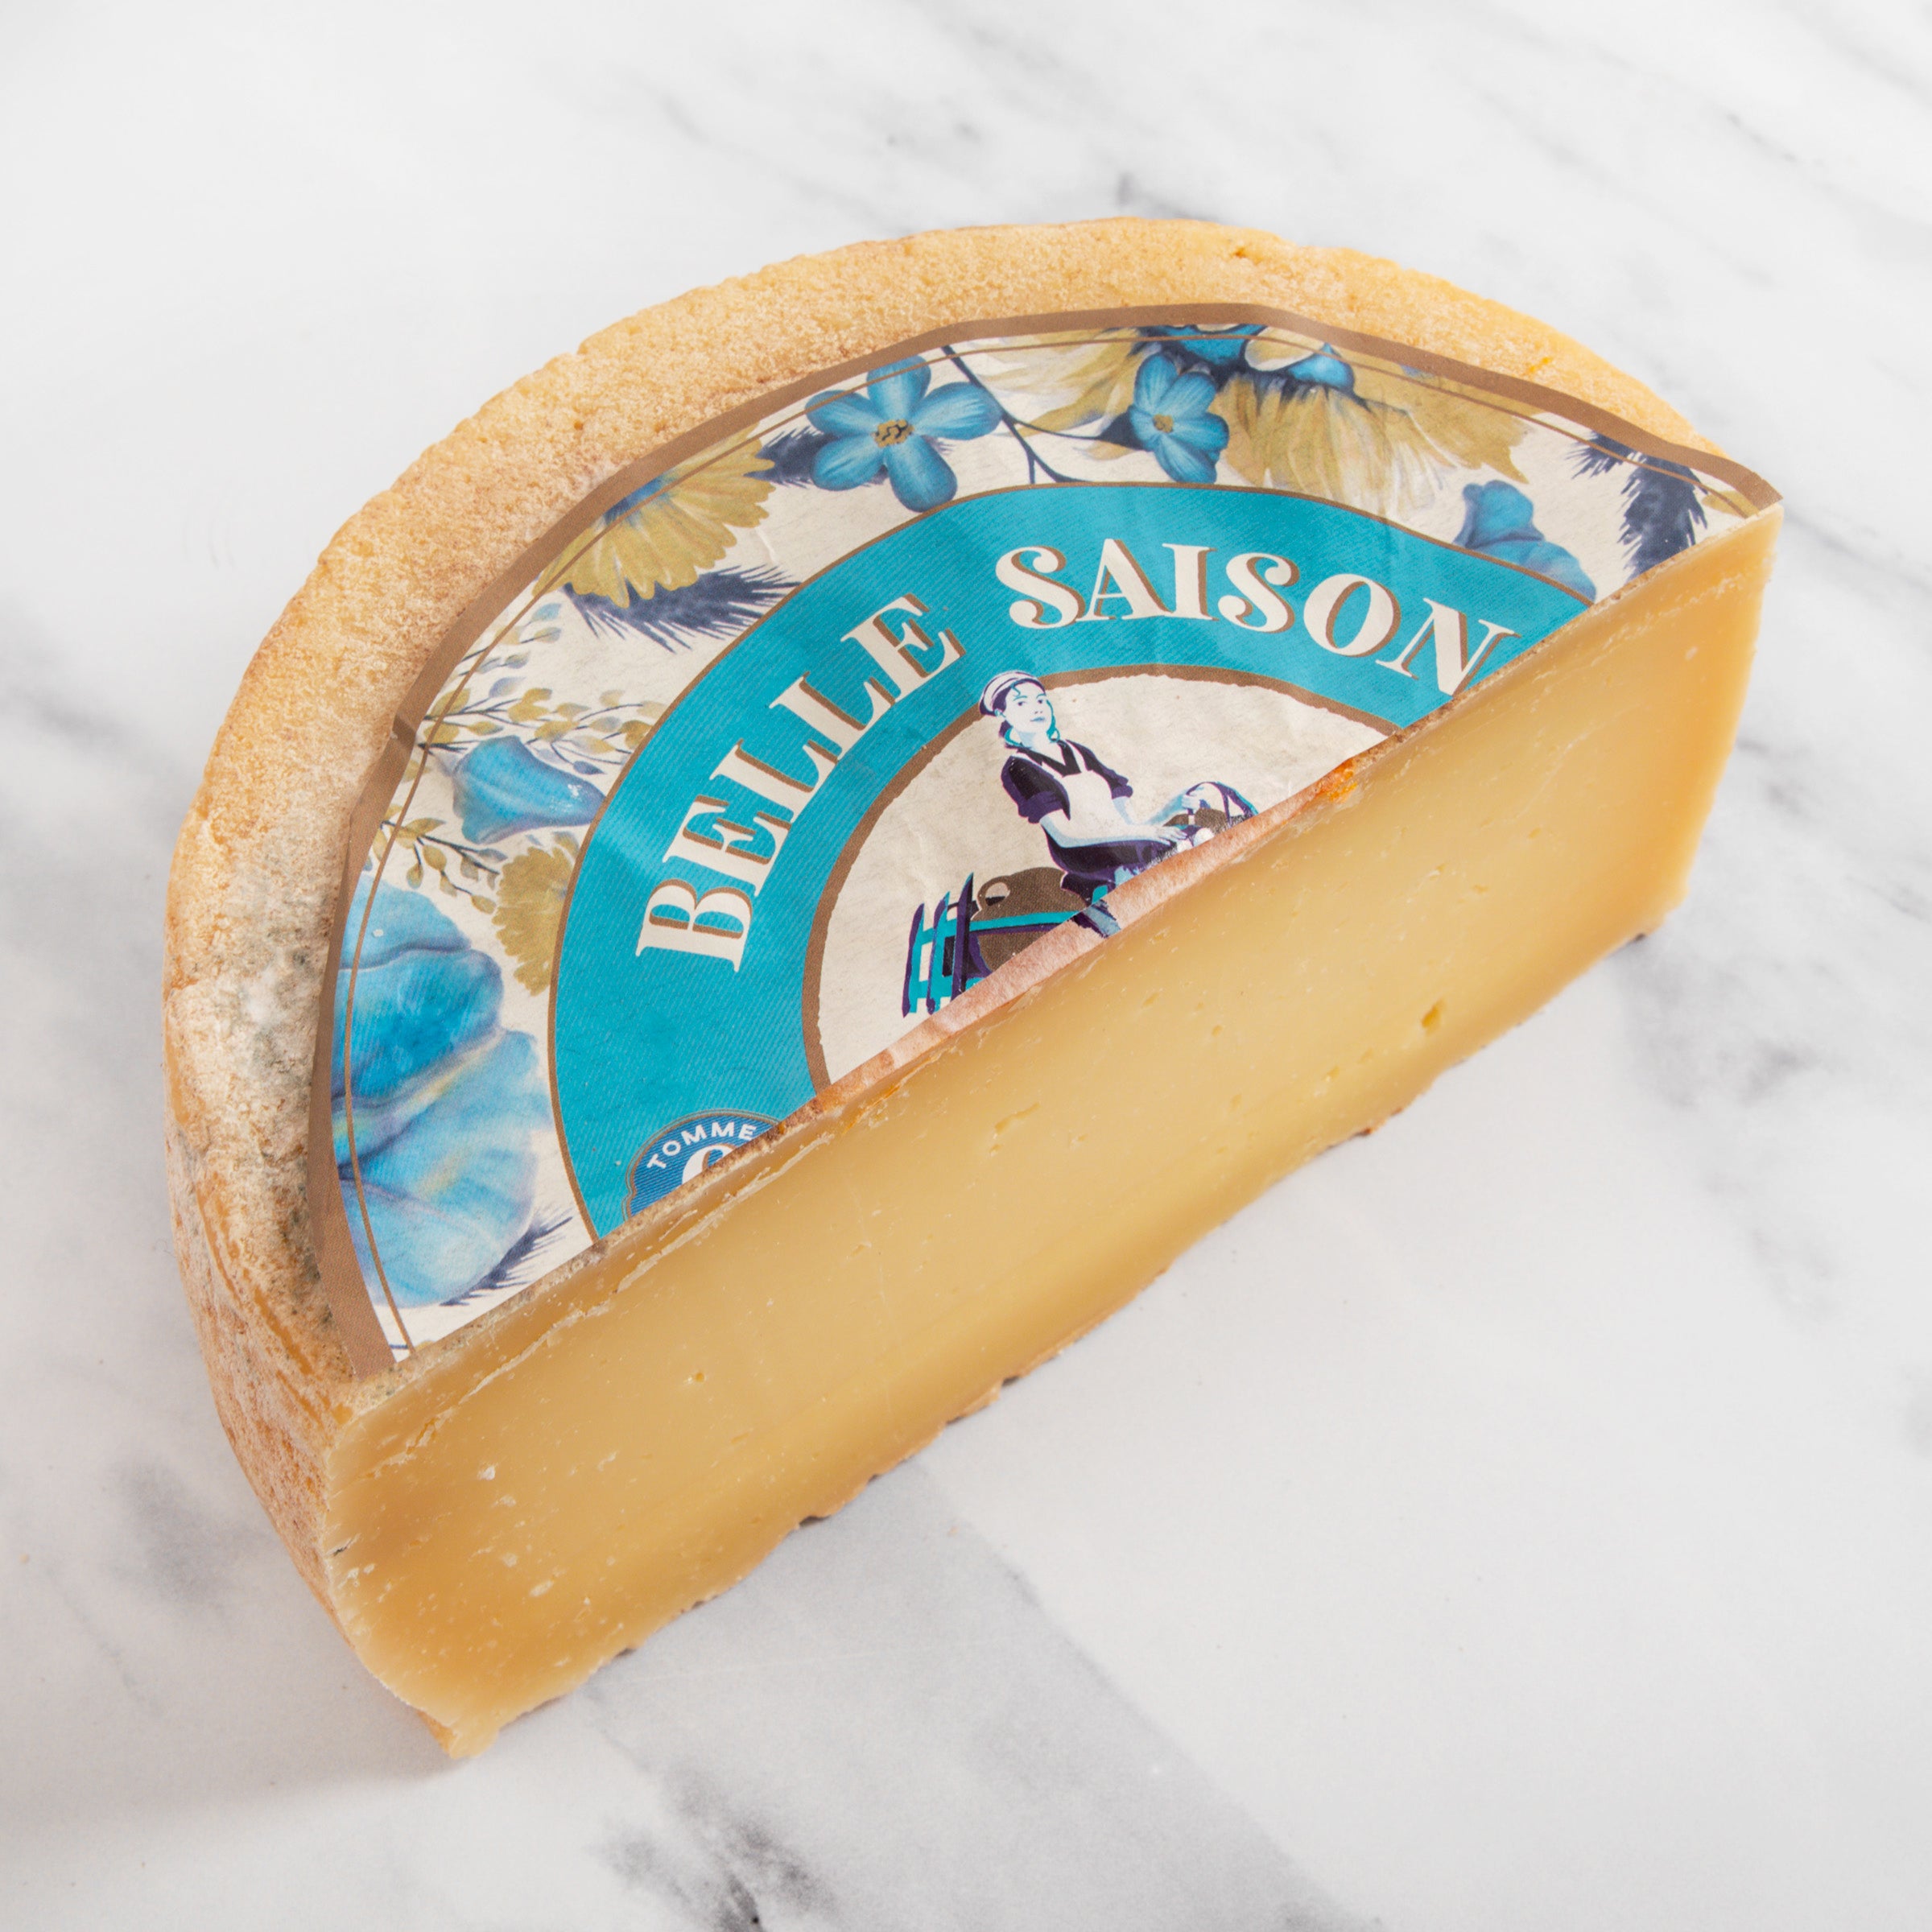 Isigny Belle Saison Cow's Milk Normandy Cheese